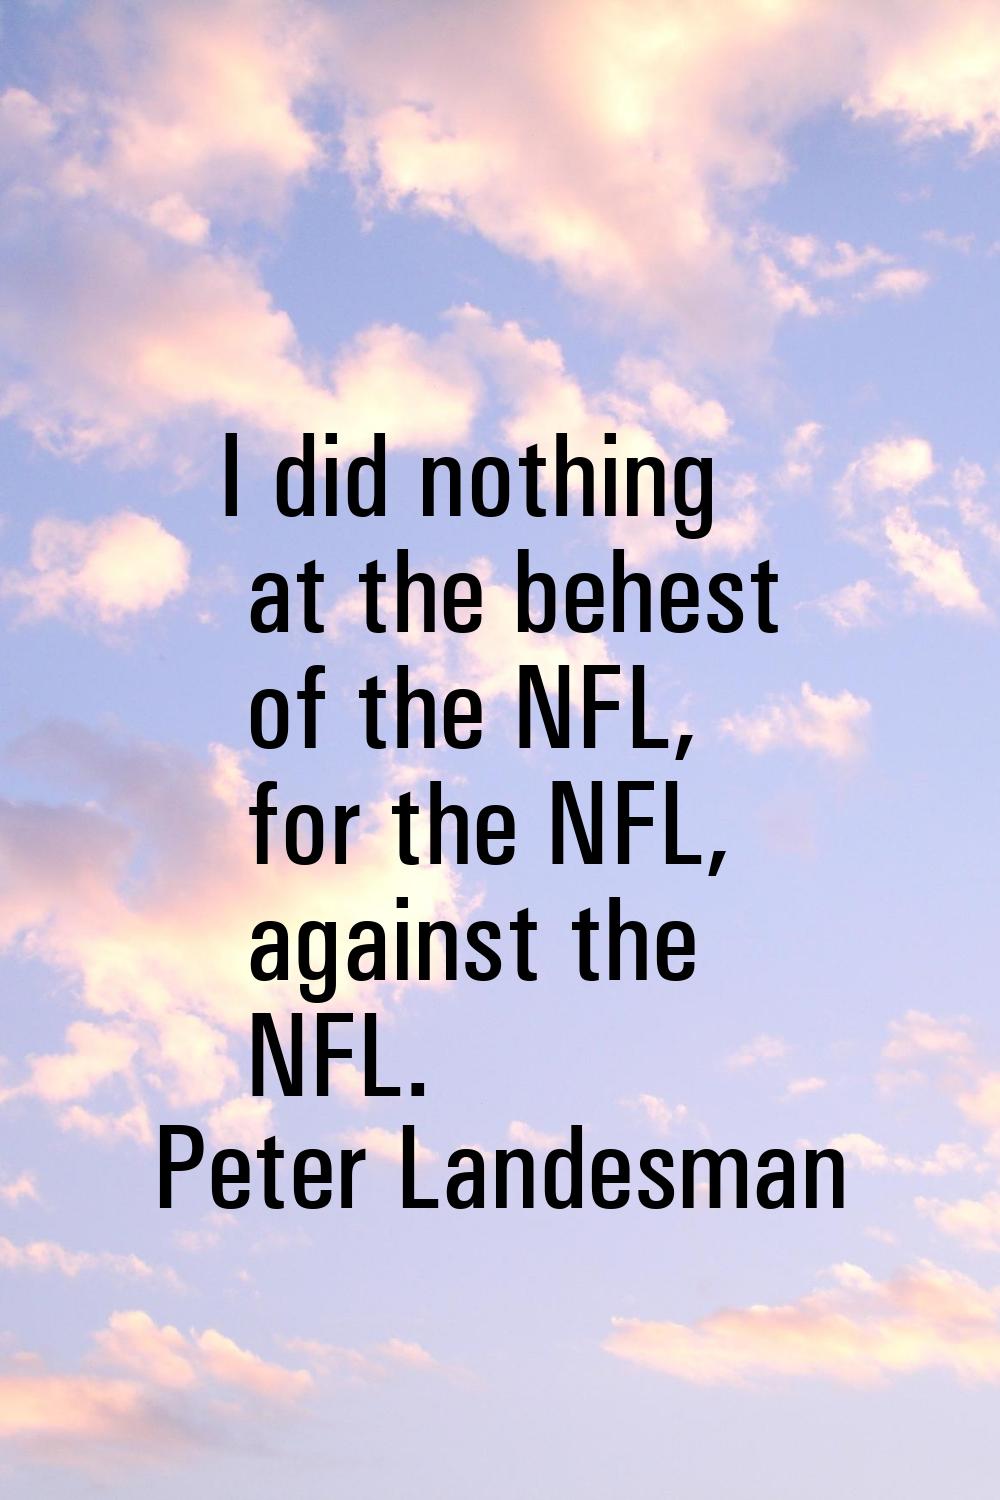 I did nothing at the behest of the NFL, for the NFL, against the NFL.